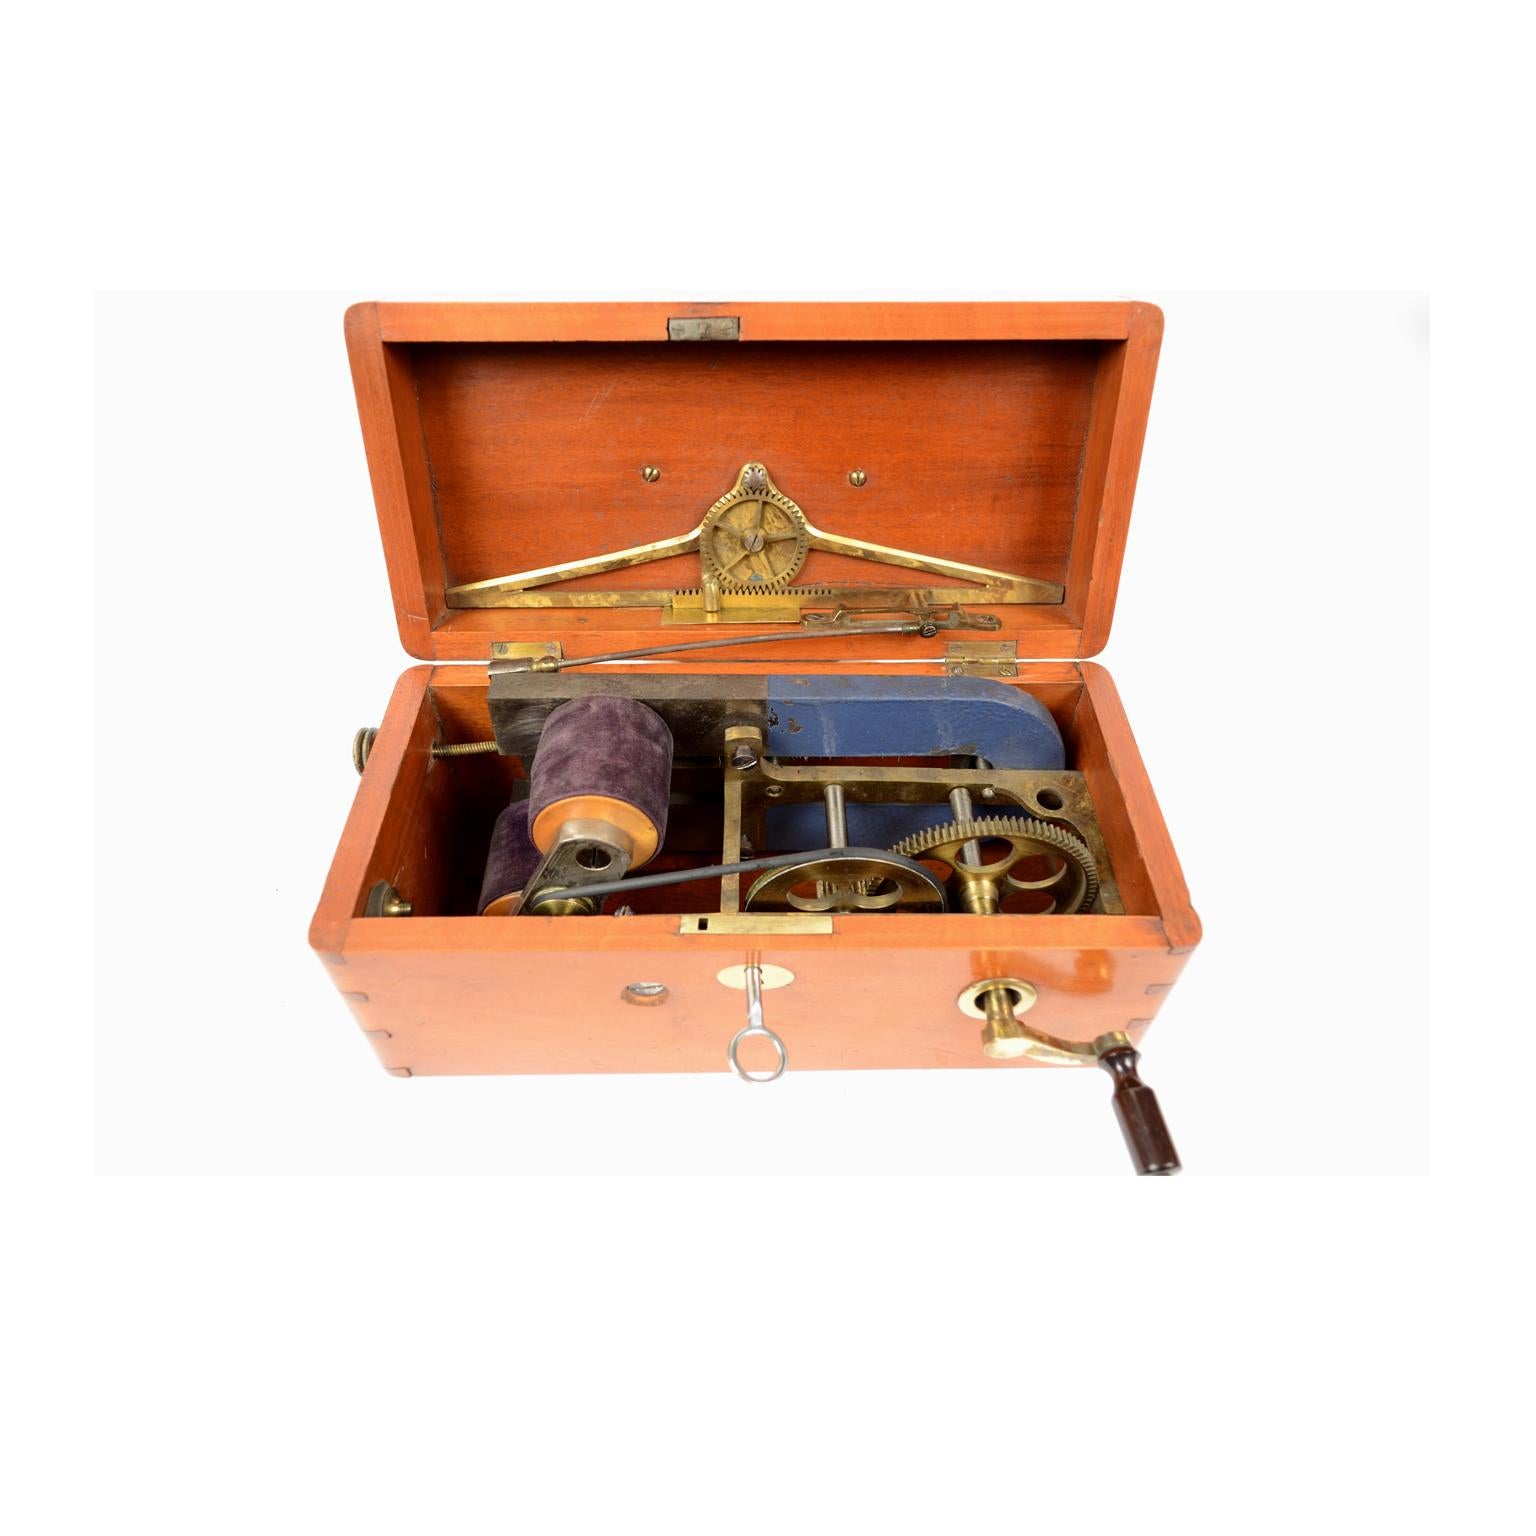 Improved electric machine for nervous diseases placed in mahogany box with external handle and strength indicator on the cover, signed by Joseph Gray & Co. in 1880. Measures: 26 x 12 cm. Very good condition.

It is a tool that generates electric